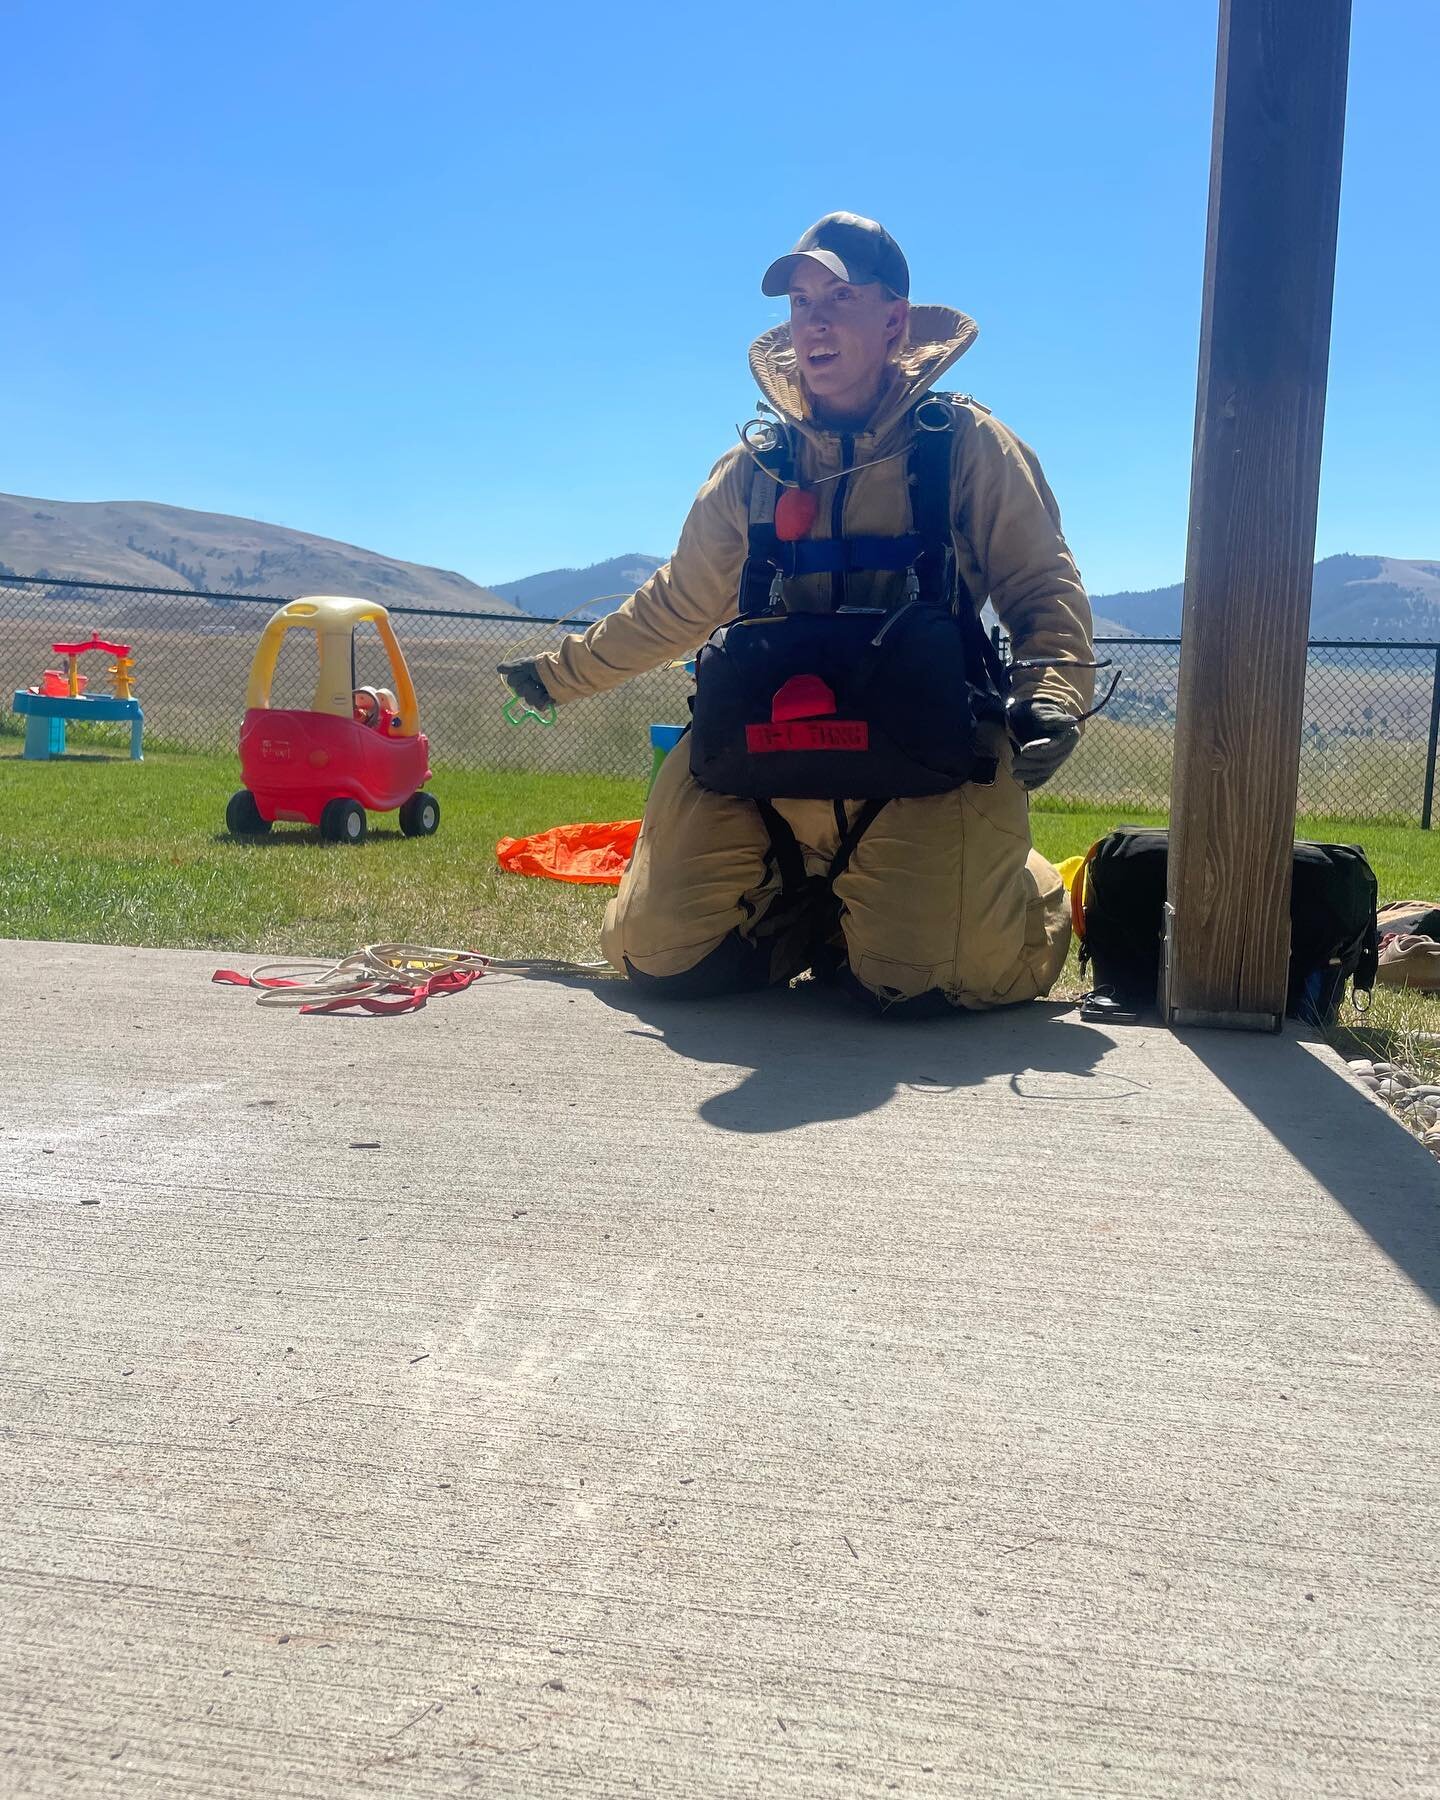 Our Forester Camps were so much fun!! 🌲 🔥 🪂 Huge thank you to Madison Whittmore with the Missoula Smokejumpers for an amazing presentation about what these heroes do for our forests! It was so cool to hear from a FEMALE smokejumper. 💪What a great